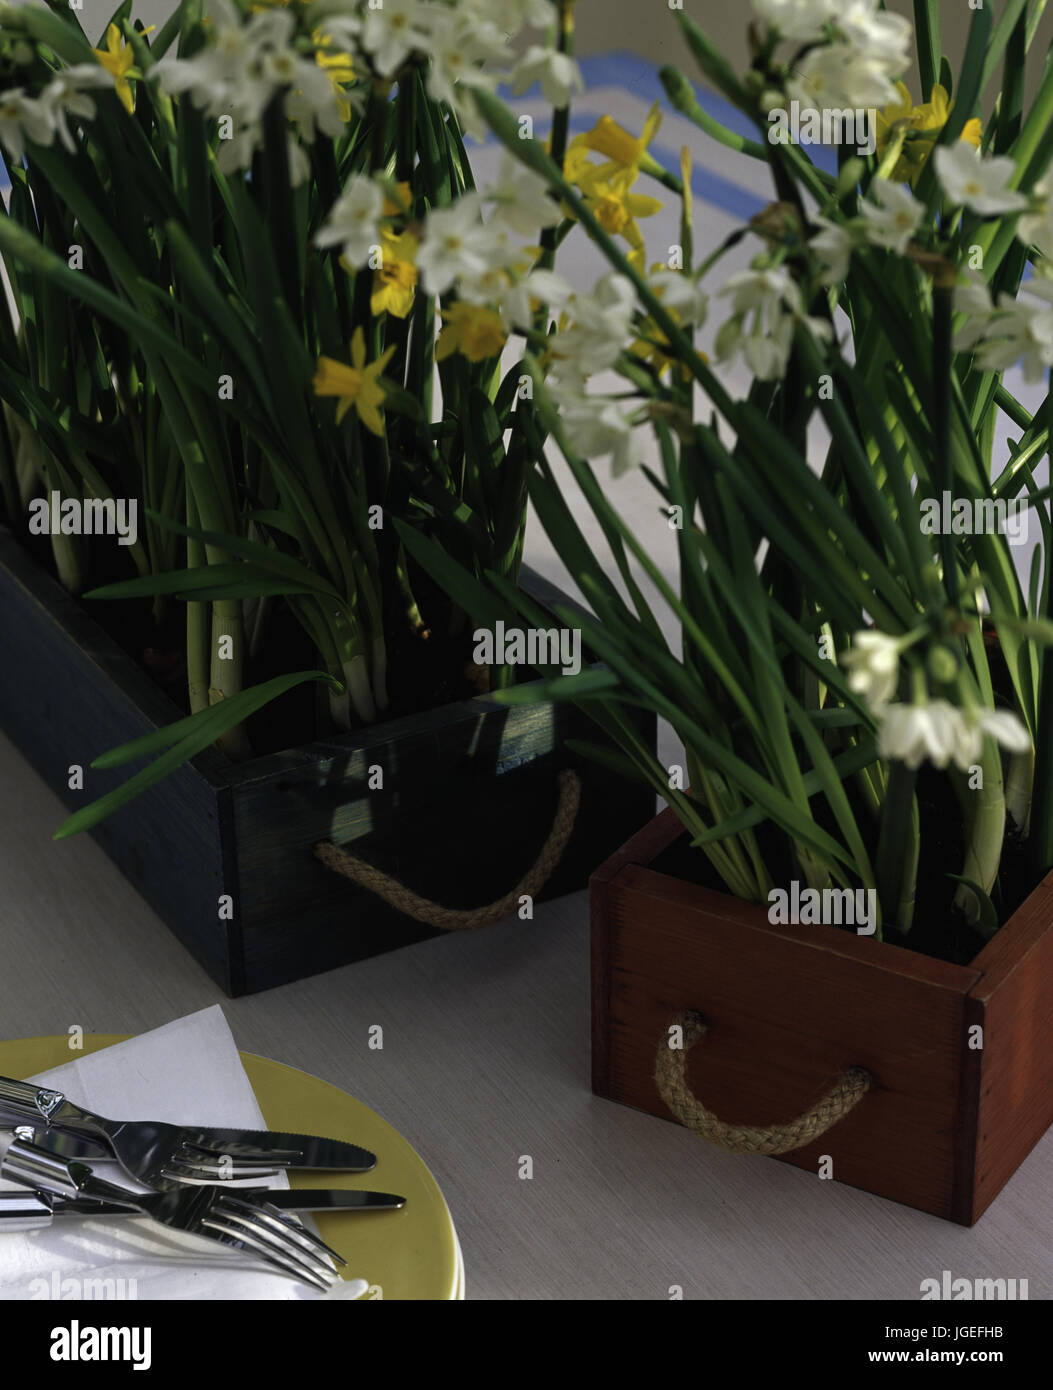 White jonquils and miniature daffodils in wooden boxes Stock Photo